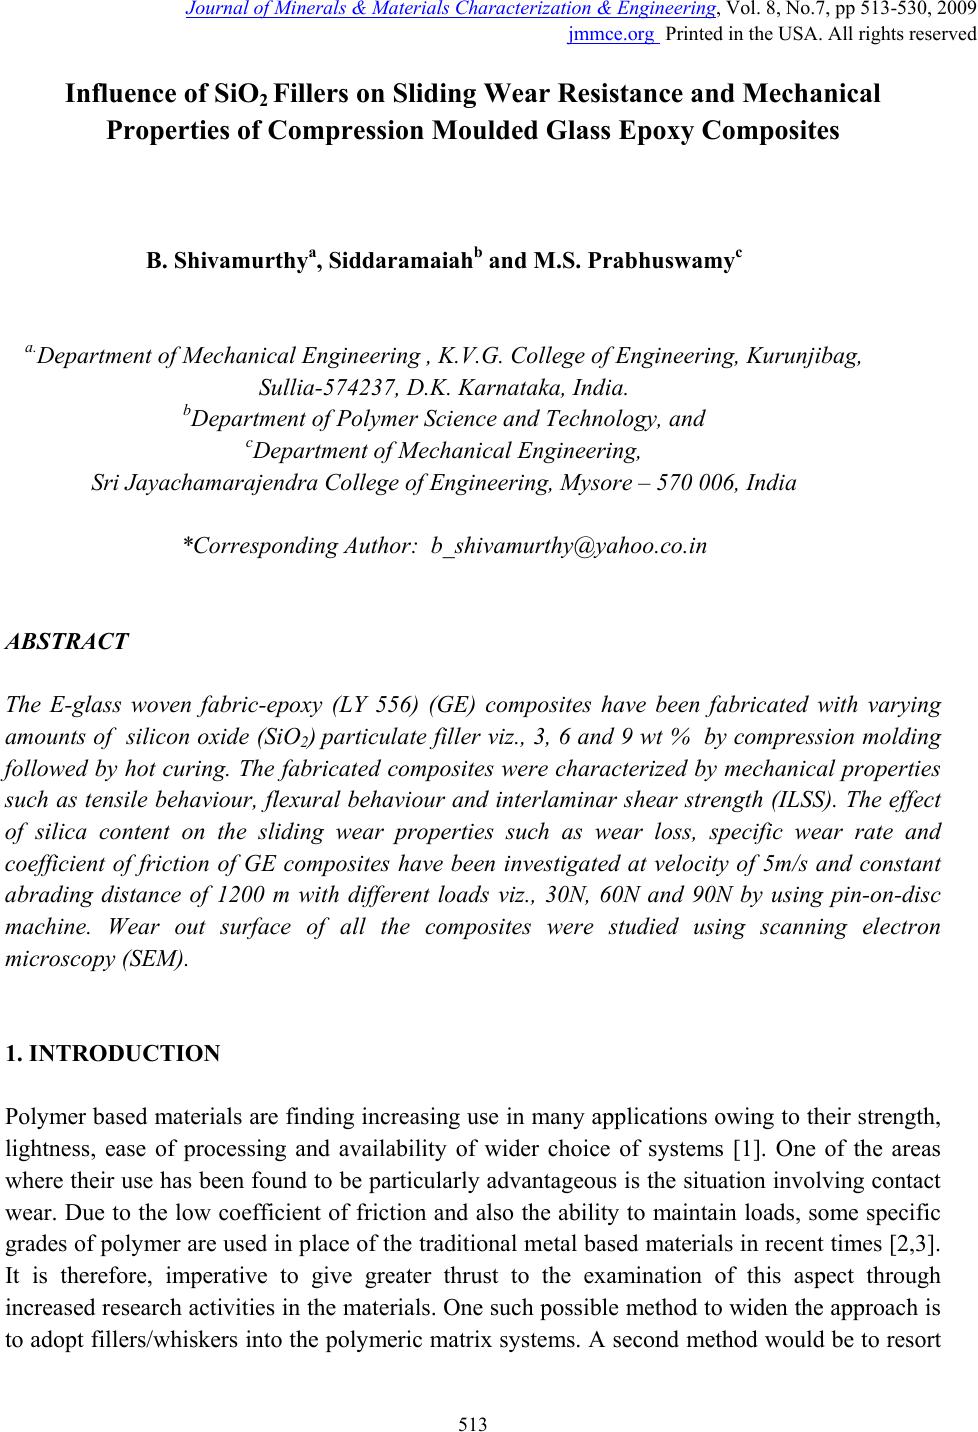 de studie Overeenkomend Verbinding Influence of SiO<sub>2</sub> Fillers on Sliding Wear Resistance and  Mechanical Properties of Compression Moulded Glass Epoxy Composites